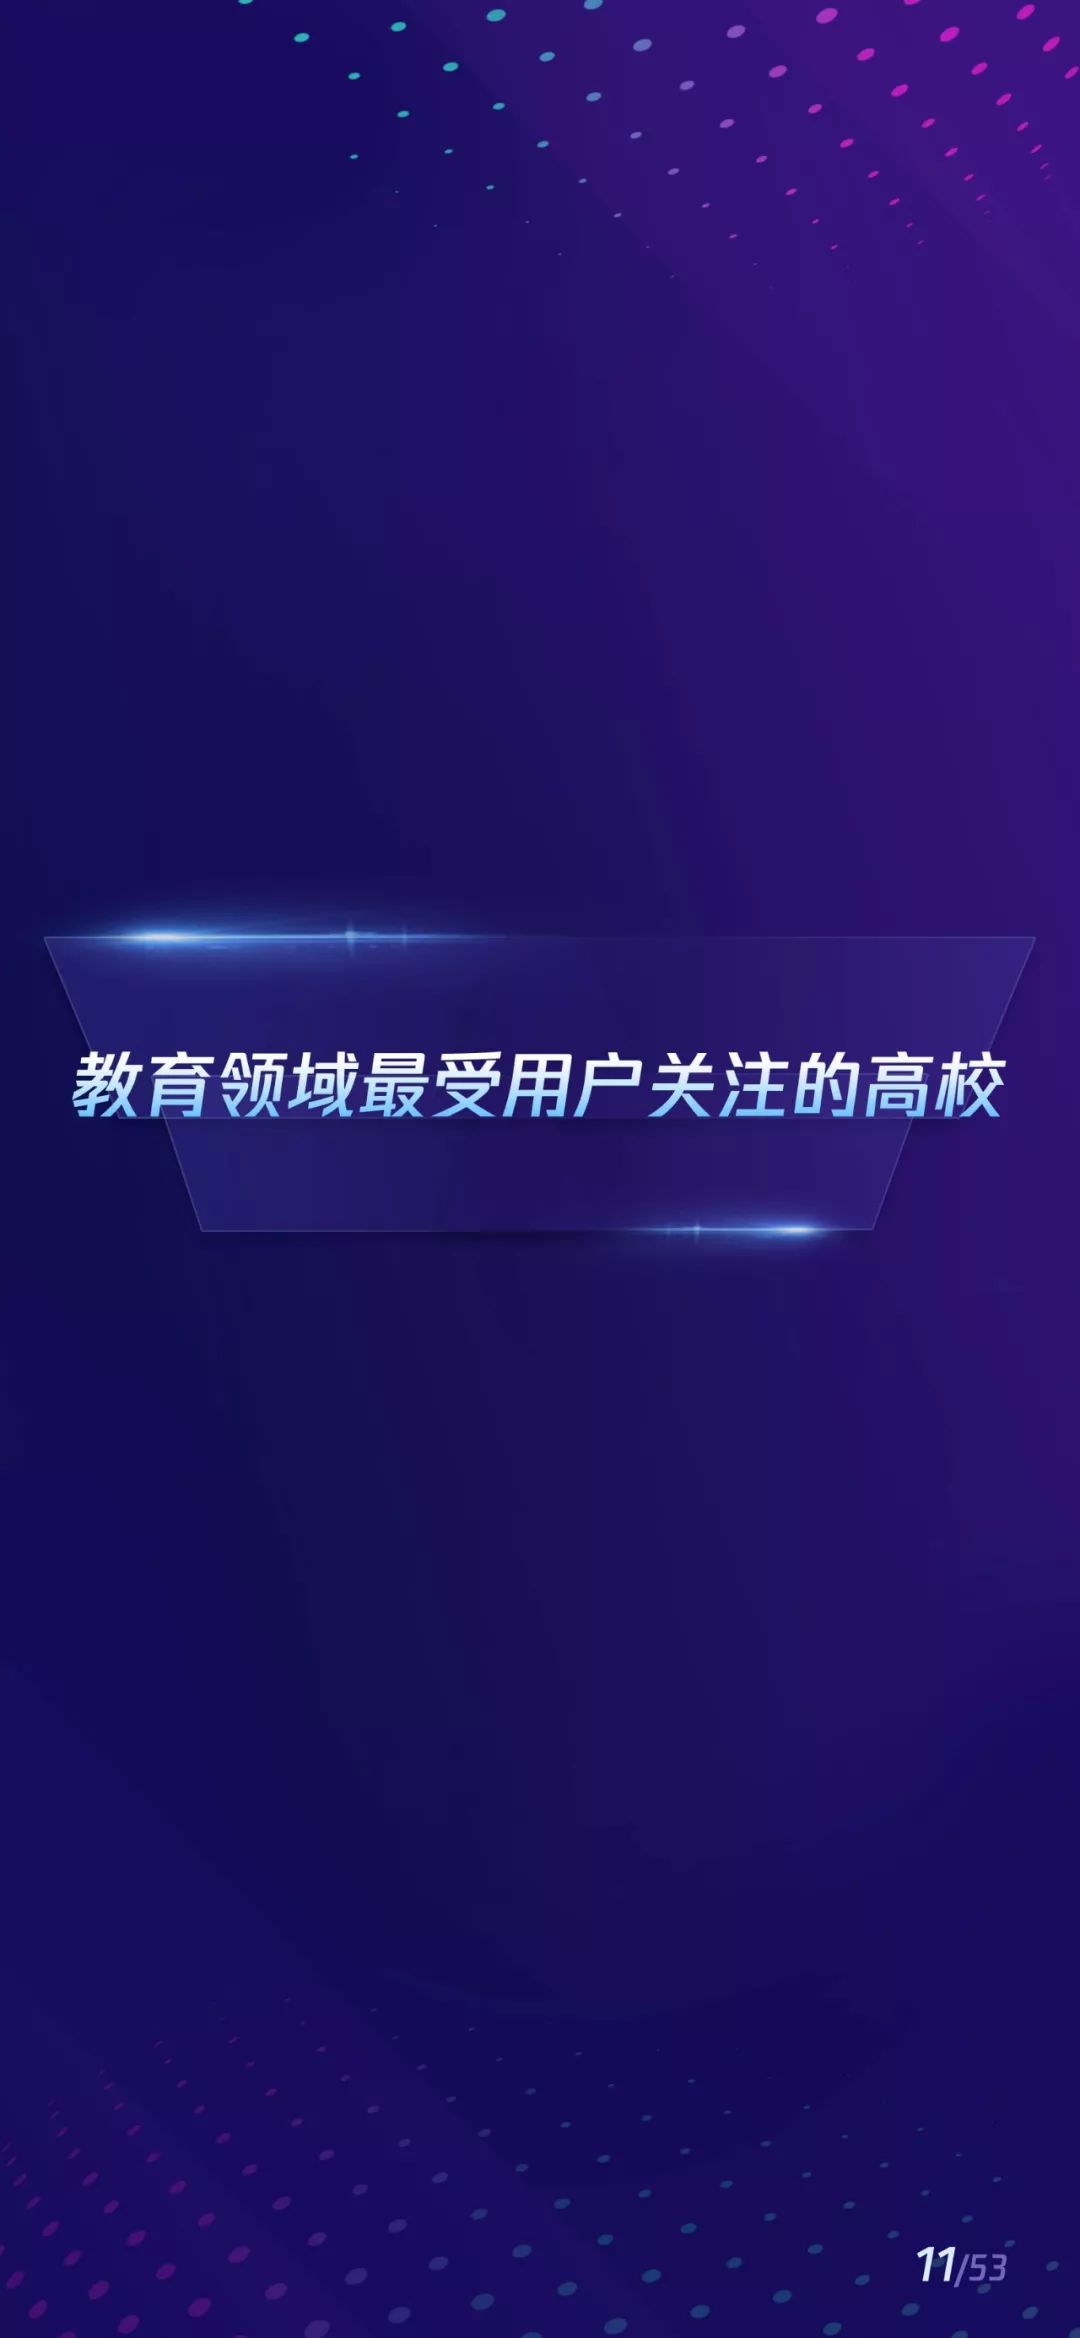 Tencent News ConTech Data Labs Releases New Educational Content Distribution Report for 2019